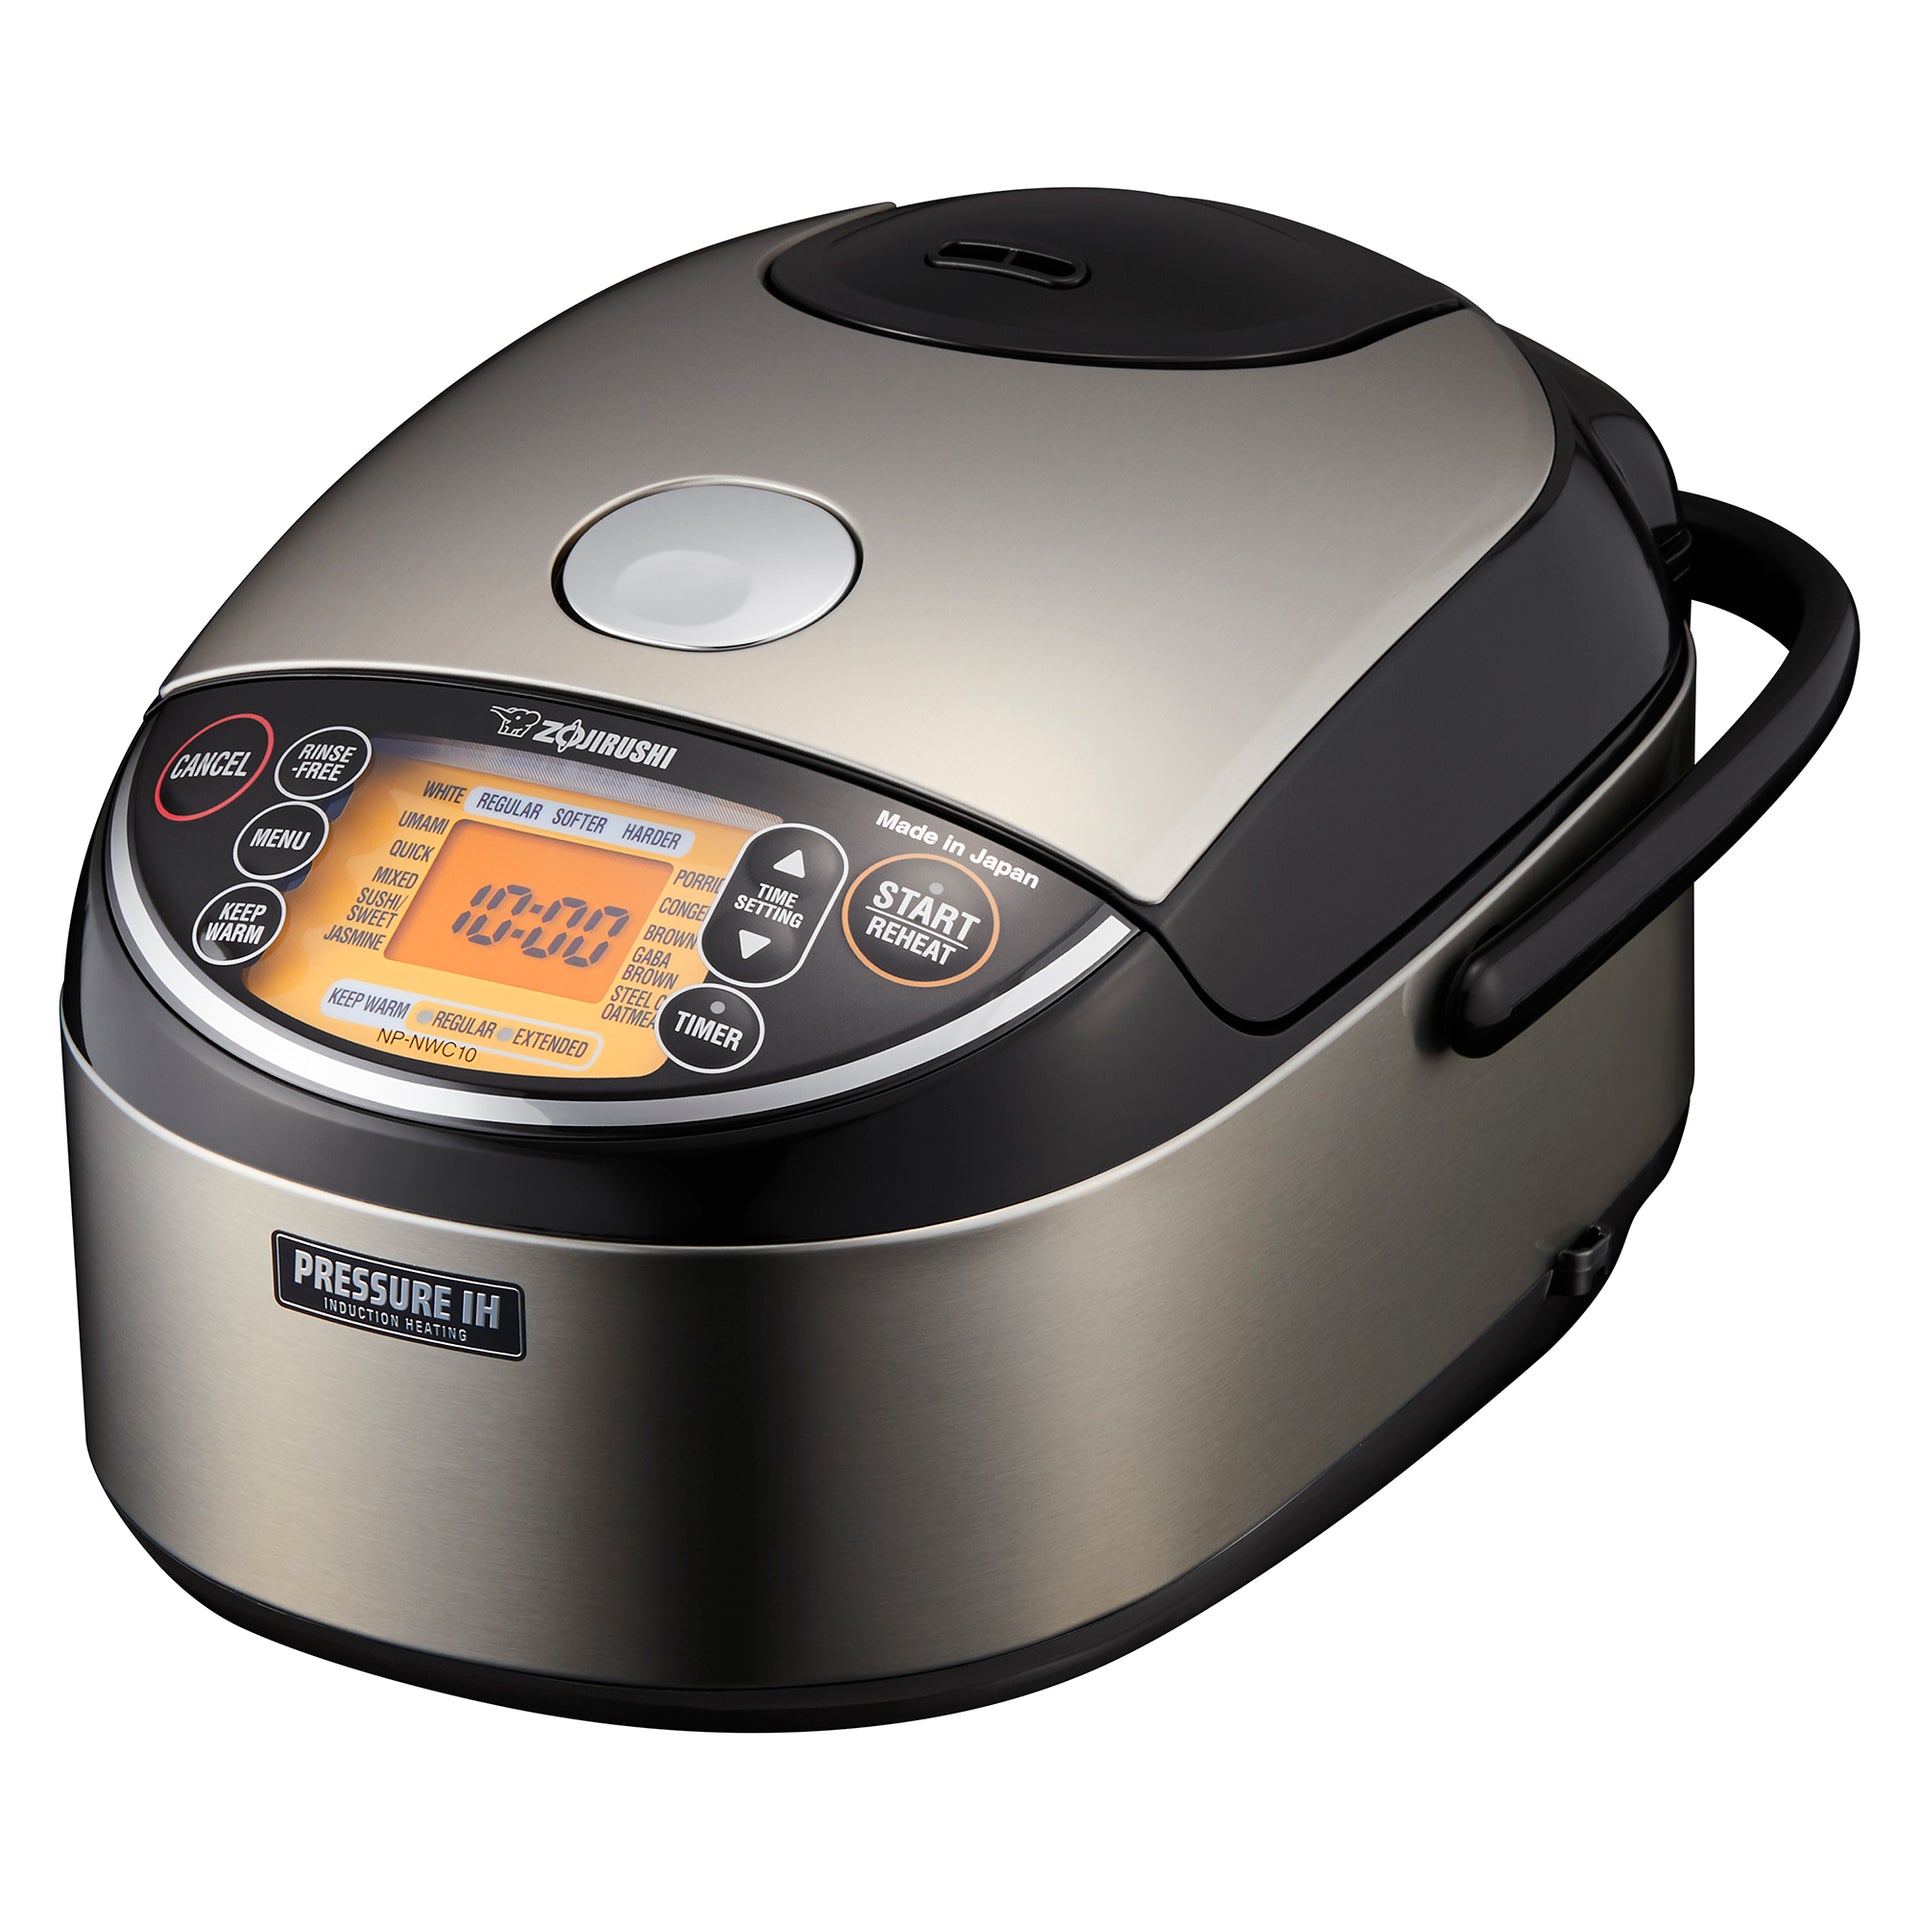 TLOG Mini Rice Cooker Review: What You Need to Know Before Buying